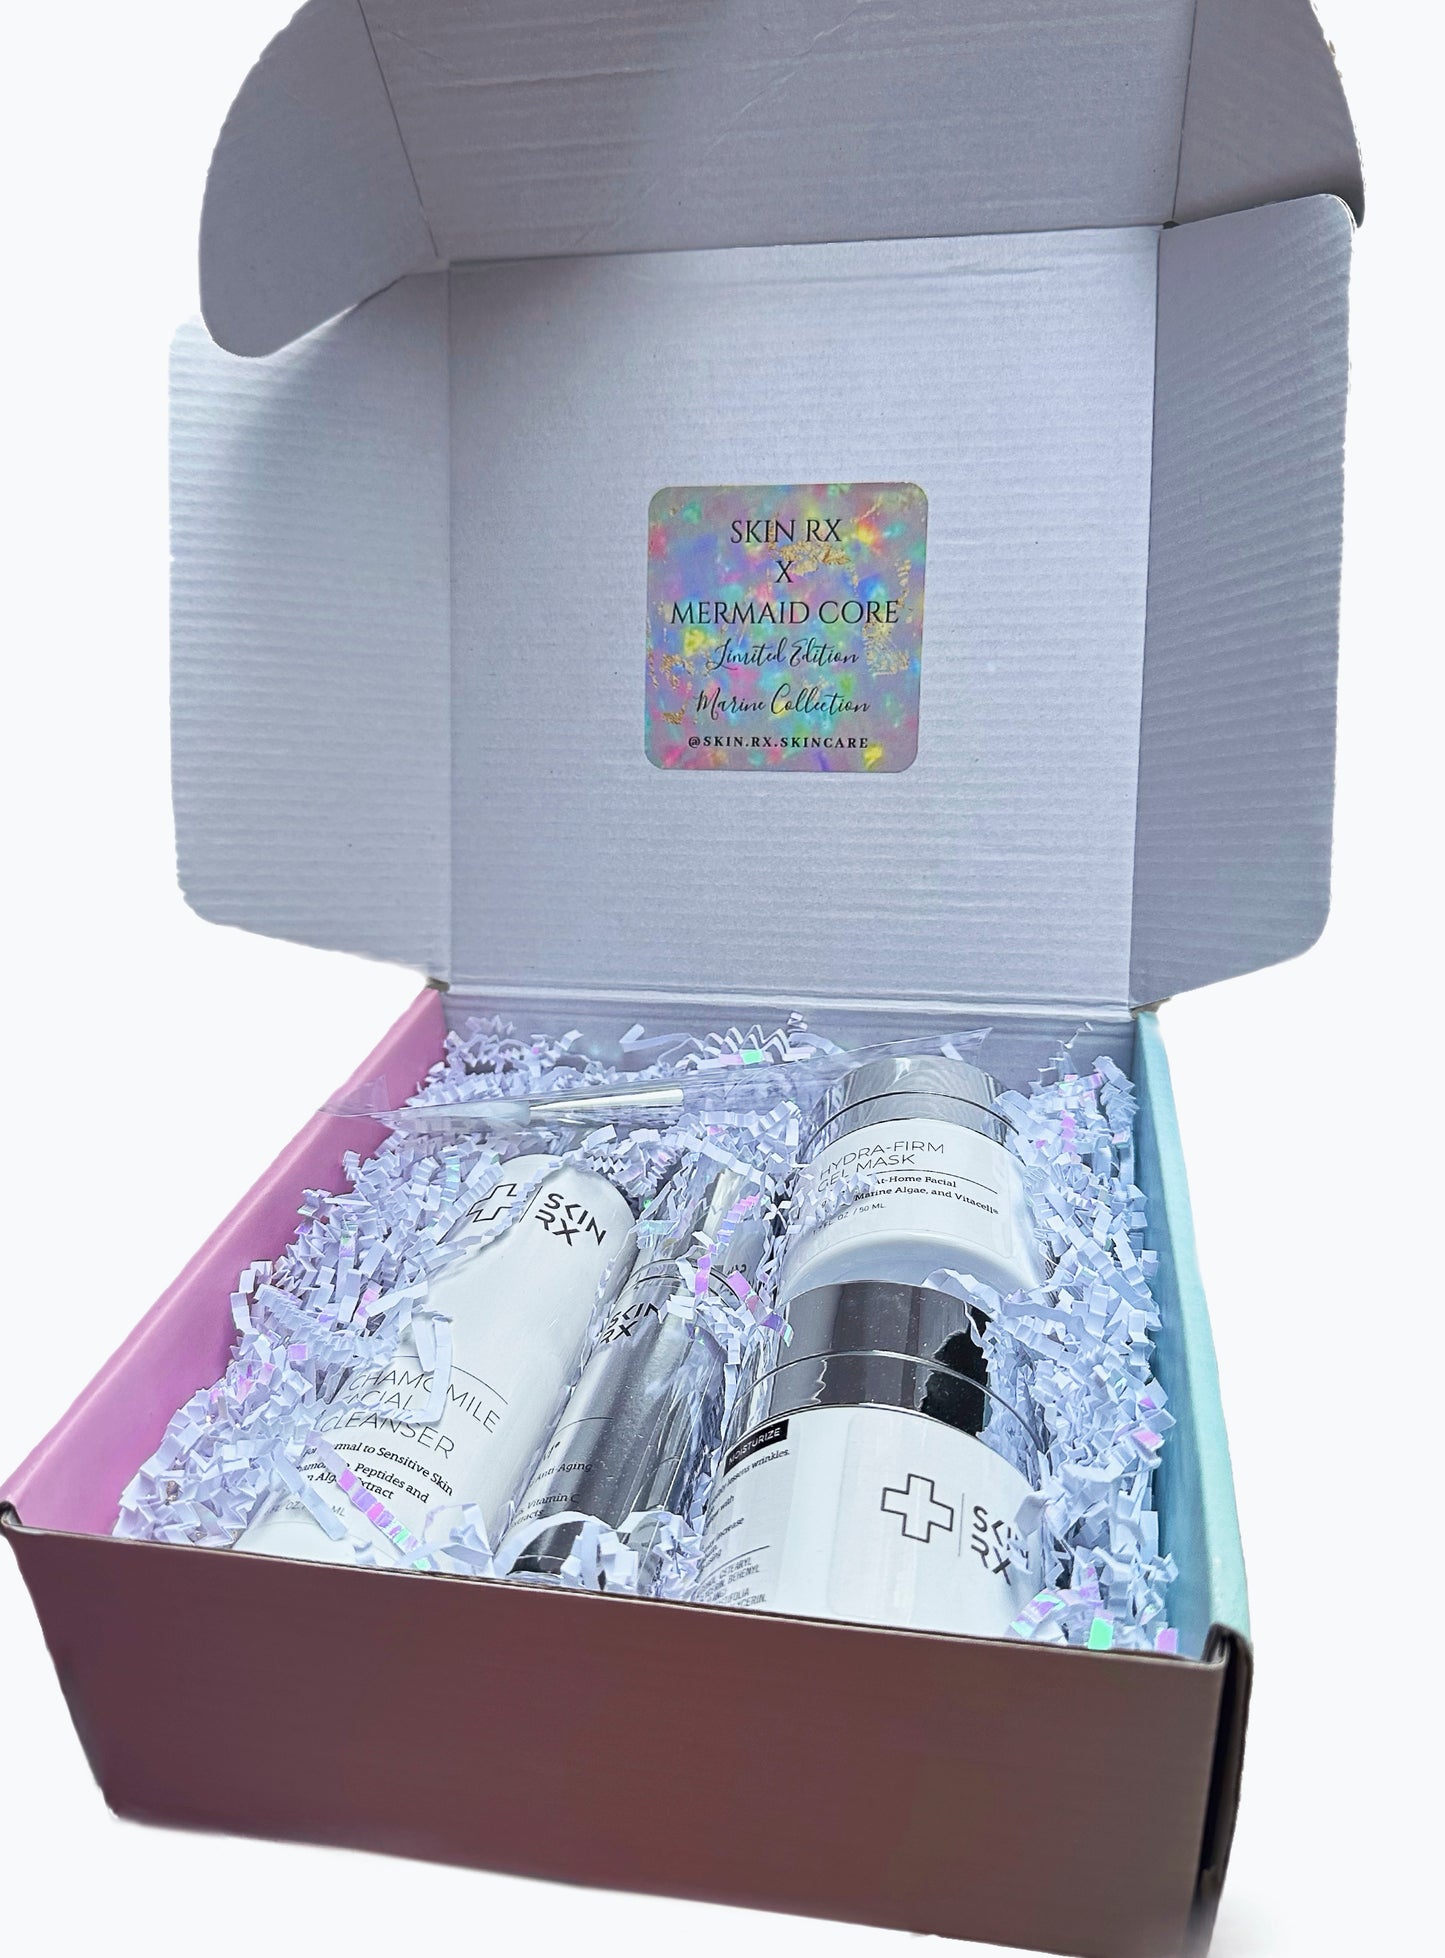 Skin Rx Limited Edition Mermaid Core Gift set